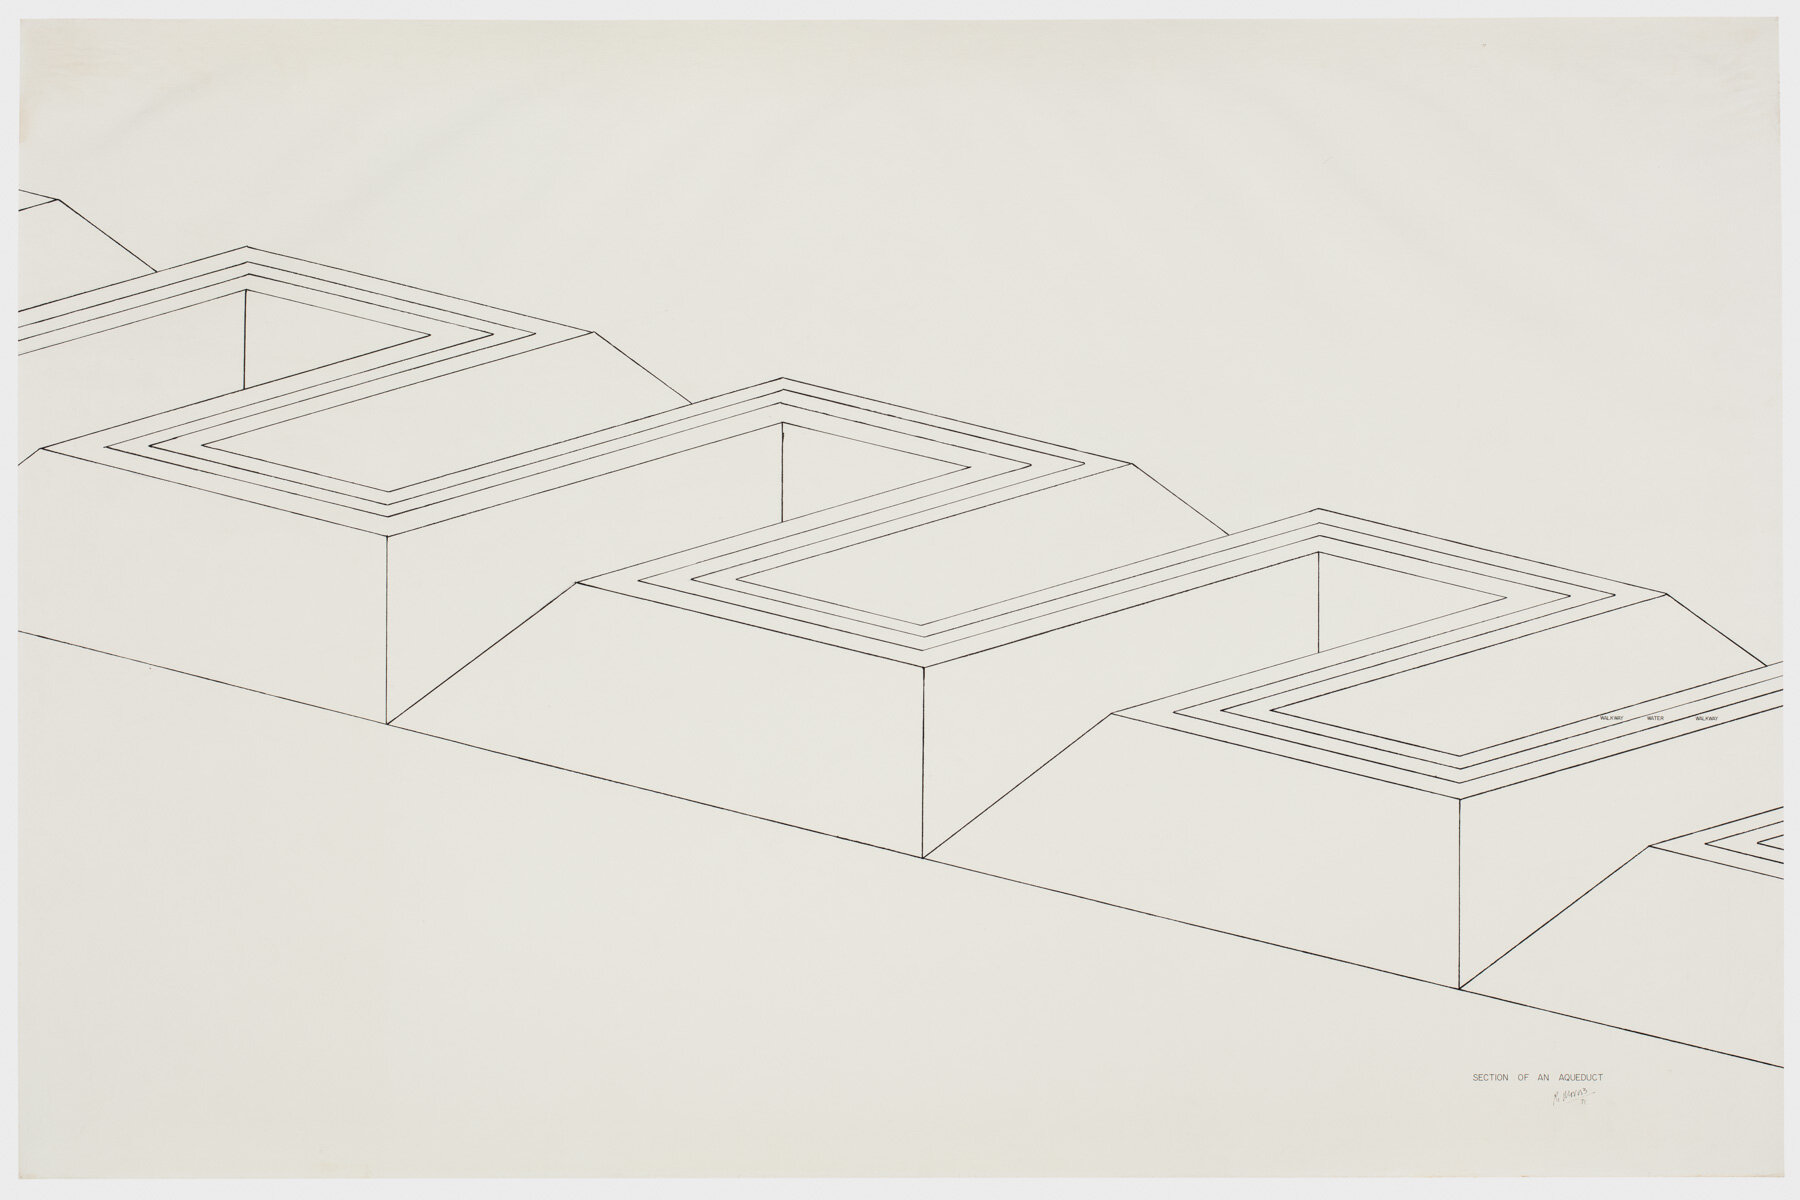  Robert Morris.  Section of an Aqueduct , 1971. Ink on paper, 42 x 64 in. (107 x 163 cm). Estate of Robert Morris, courtesy Castelli Gallery, New York. © 2019 The Estate of Robert Morris / Artists Rights Society (ARS), New York. Photo: Stan Narten 